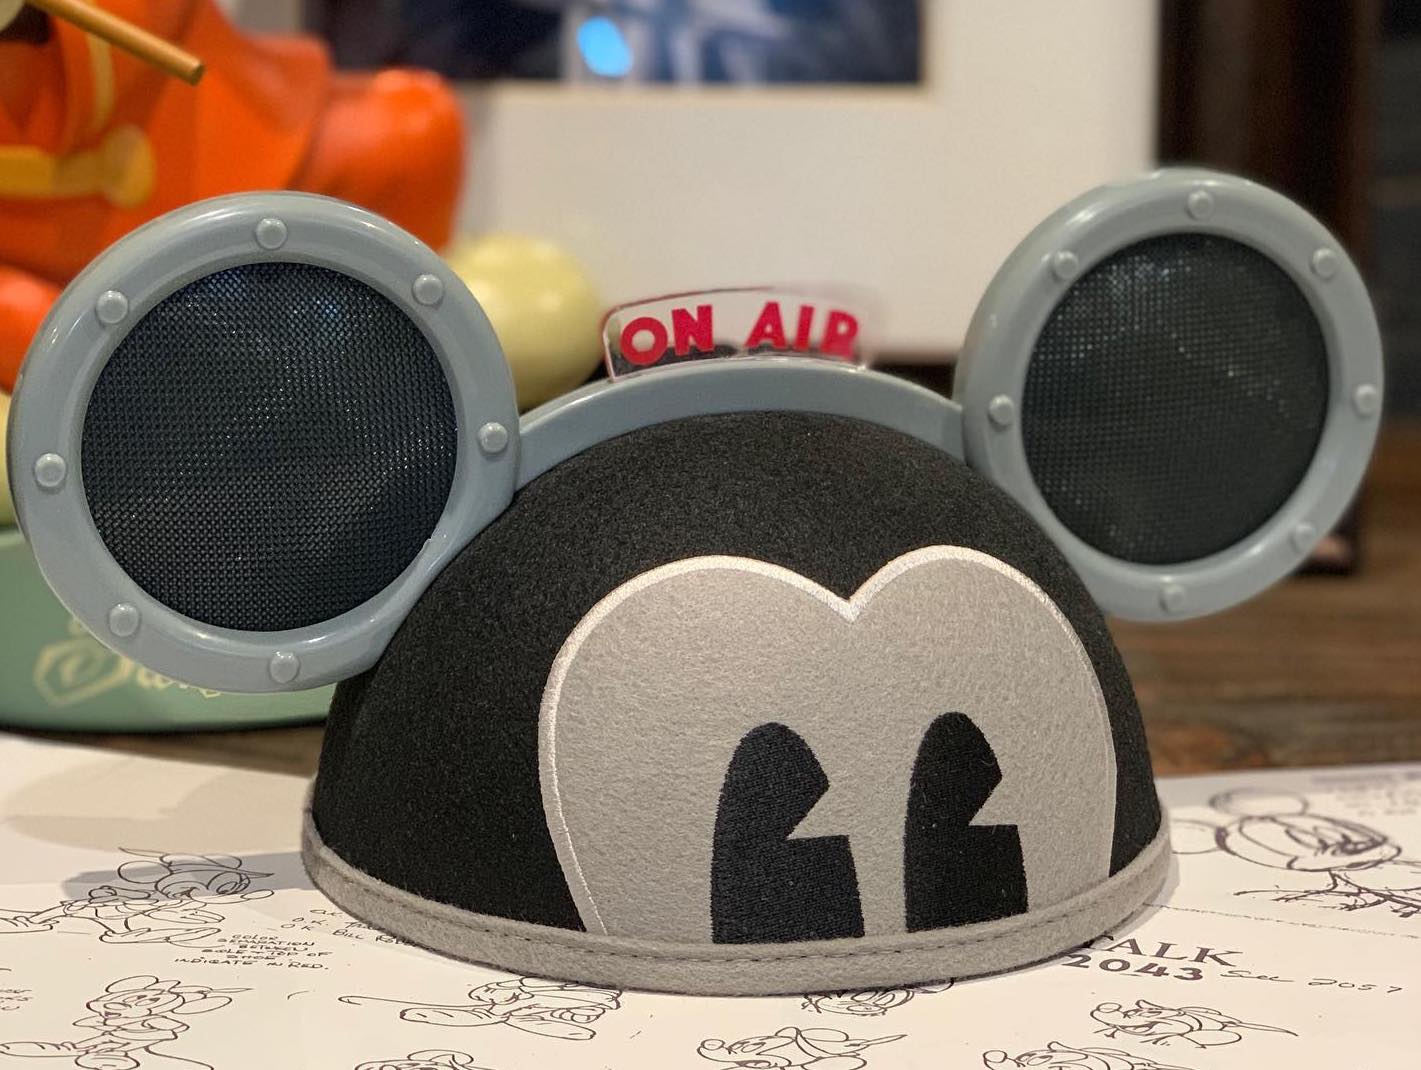 NEWS! Disney's Designer Mickey Mouse Ears by Bret Iwan Will